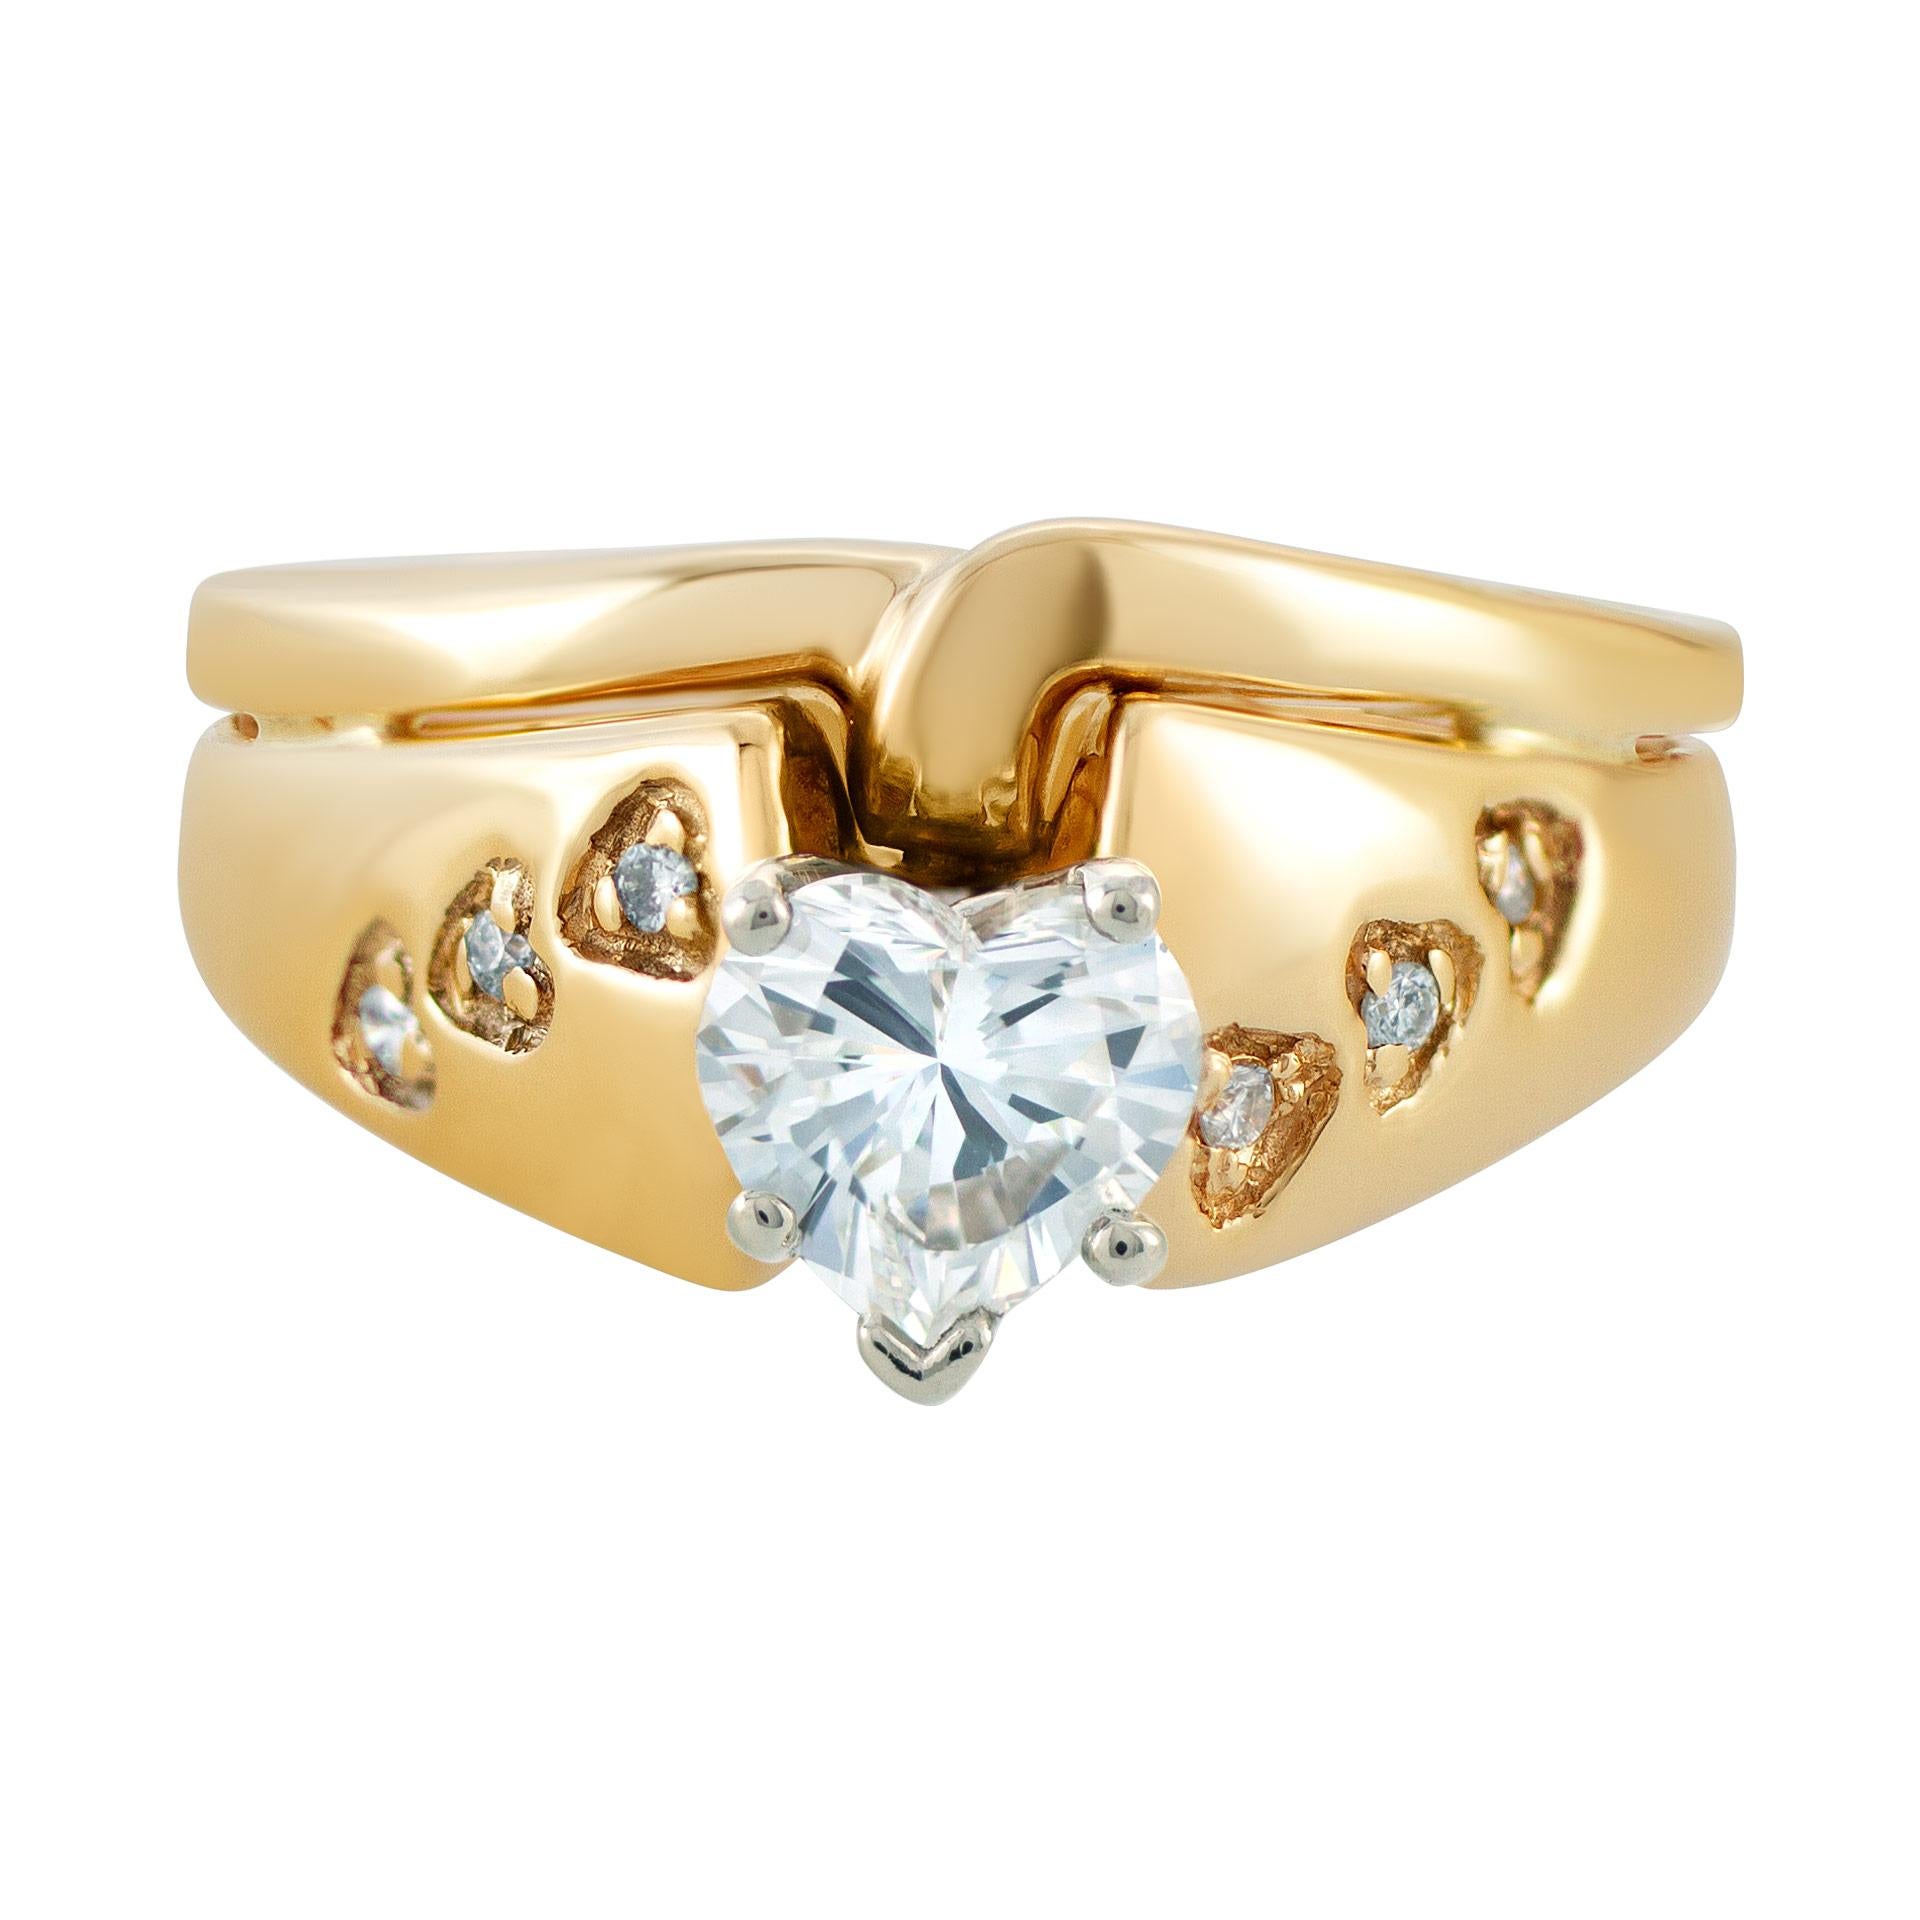 GIA report certified heart shape diamond 1 carat (F color, VS2 clarity) ring in 14k yellow gold setting. Size 10.5. This GIA report certified ring is currently size 10.5 and some items can be sized up or down, please ask! It weighs 3.8 pennyweights